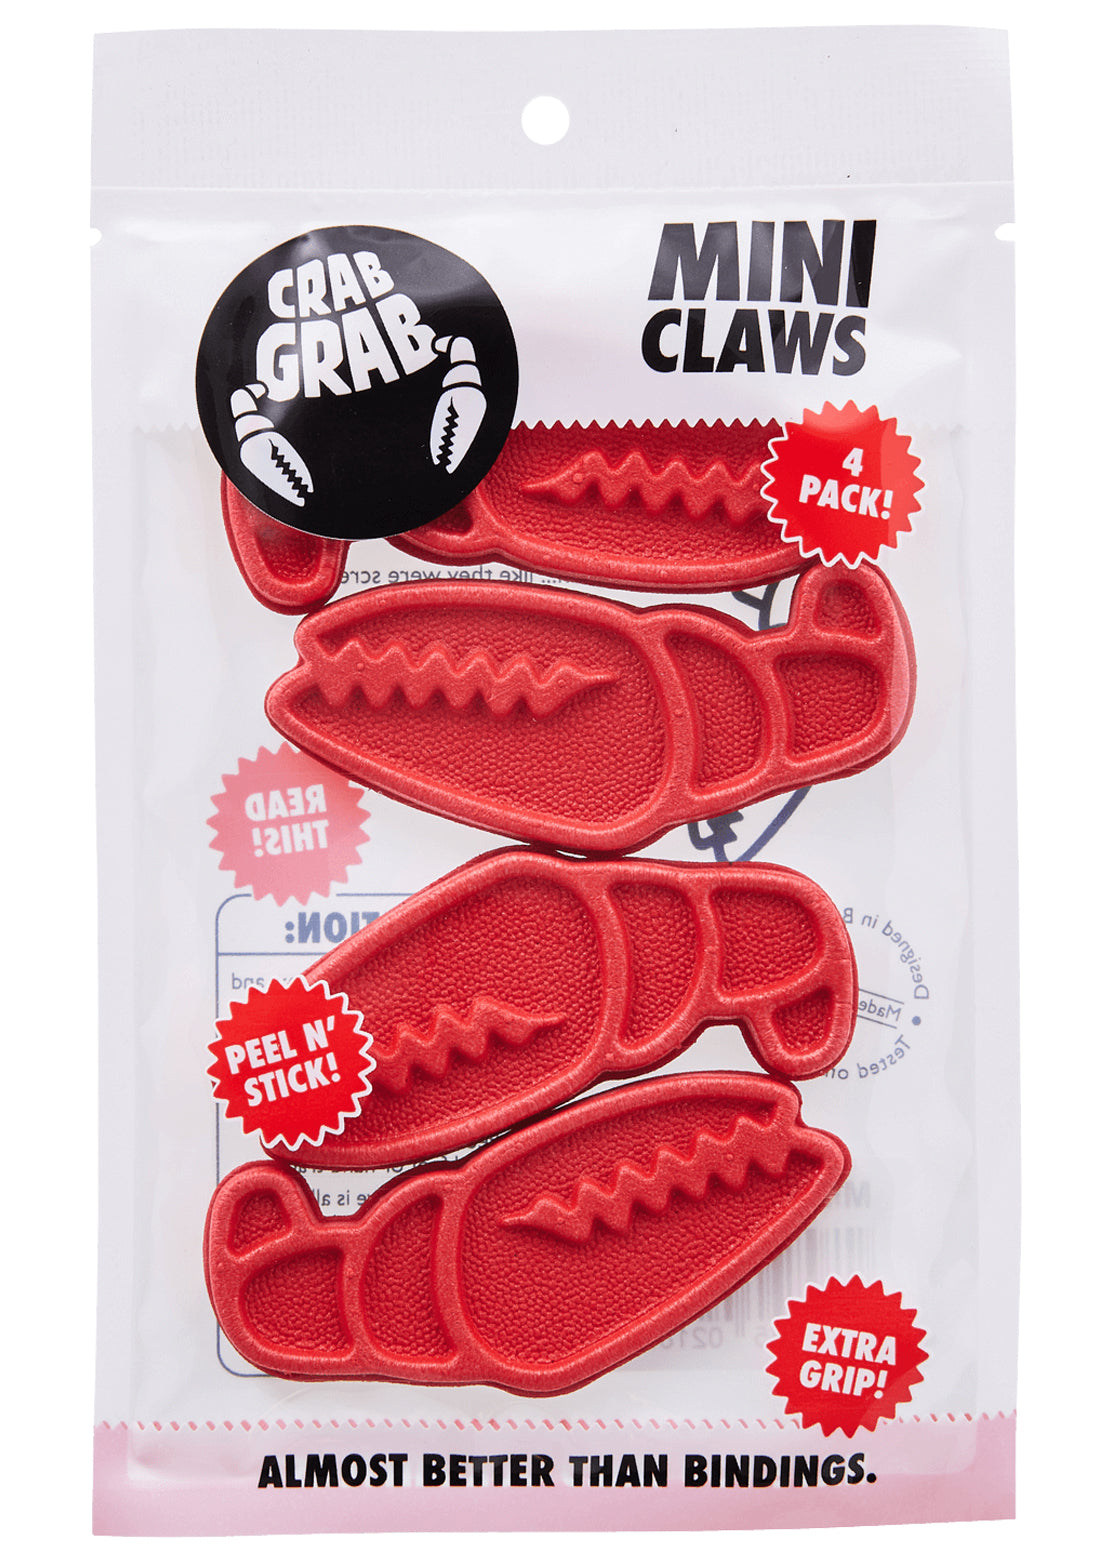 Crab Grab Mini Claws Traction Stomp Pad Red